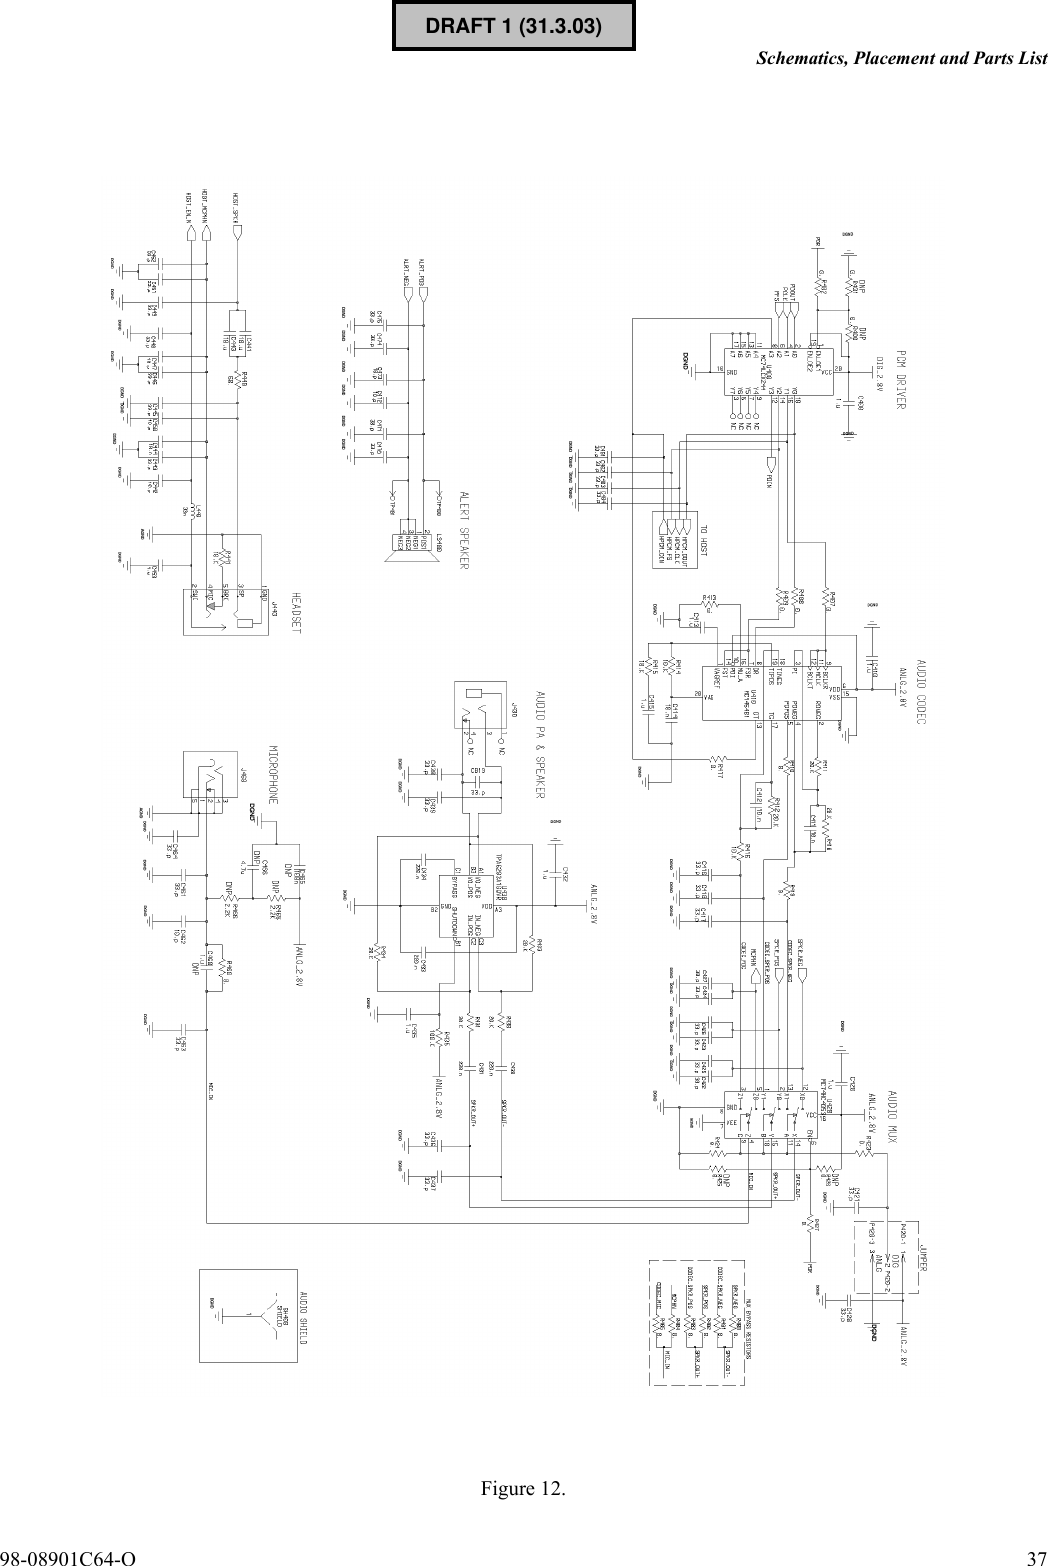 98-08901C64-O 37Schematics, Placement and Parts ListFigure 12.DRAFT 1 (31.3.03)